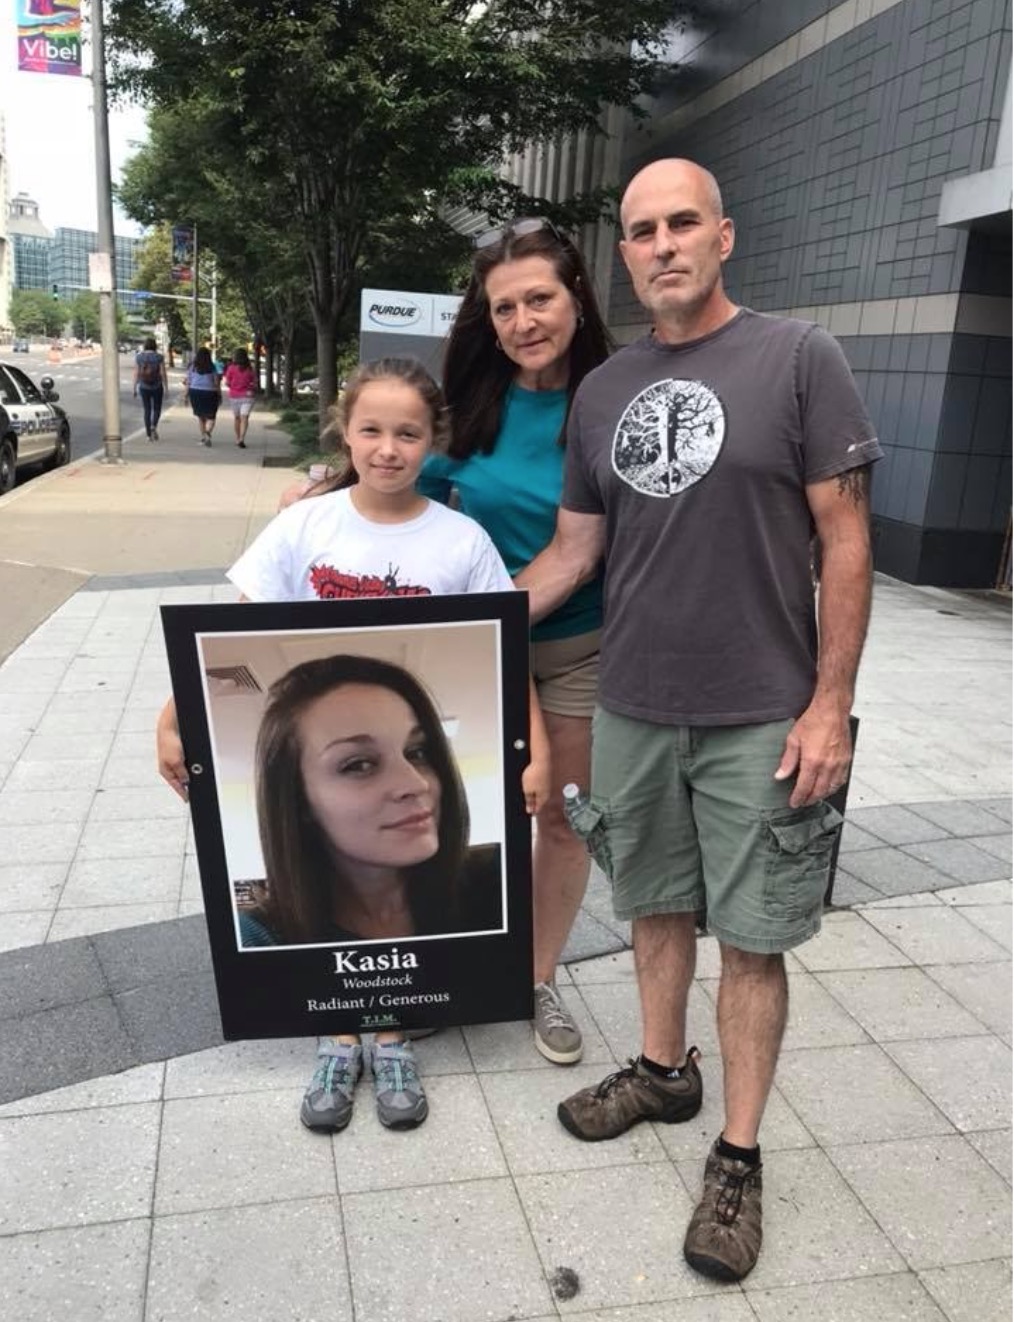 Caedence marches with her grandparents at Purdue Pharma in 2018, holding a photo of her mother.